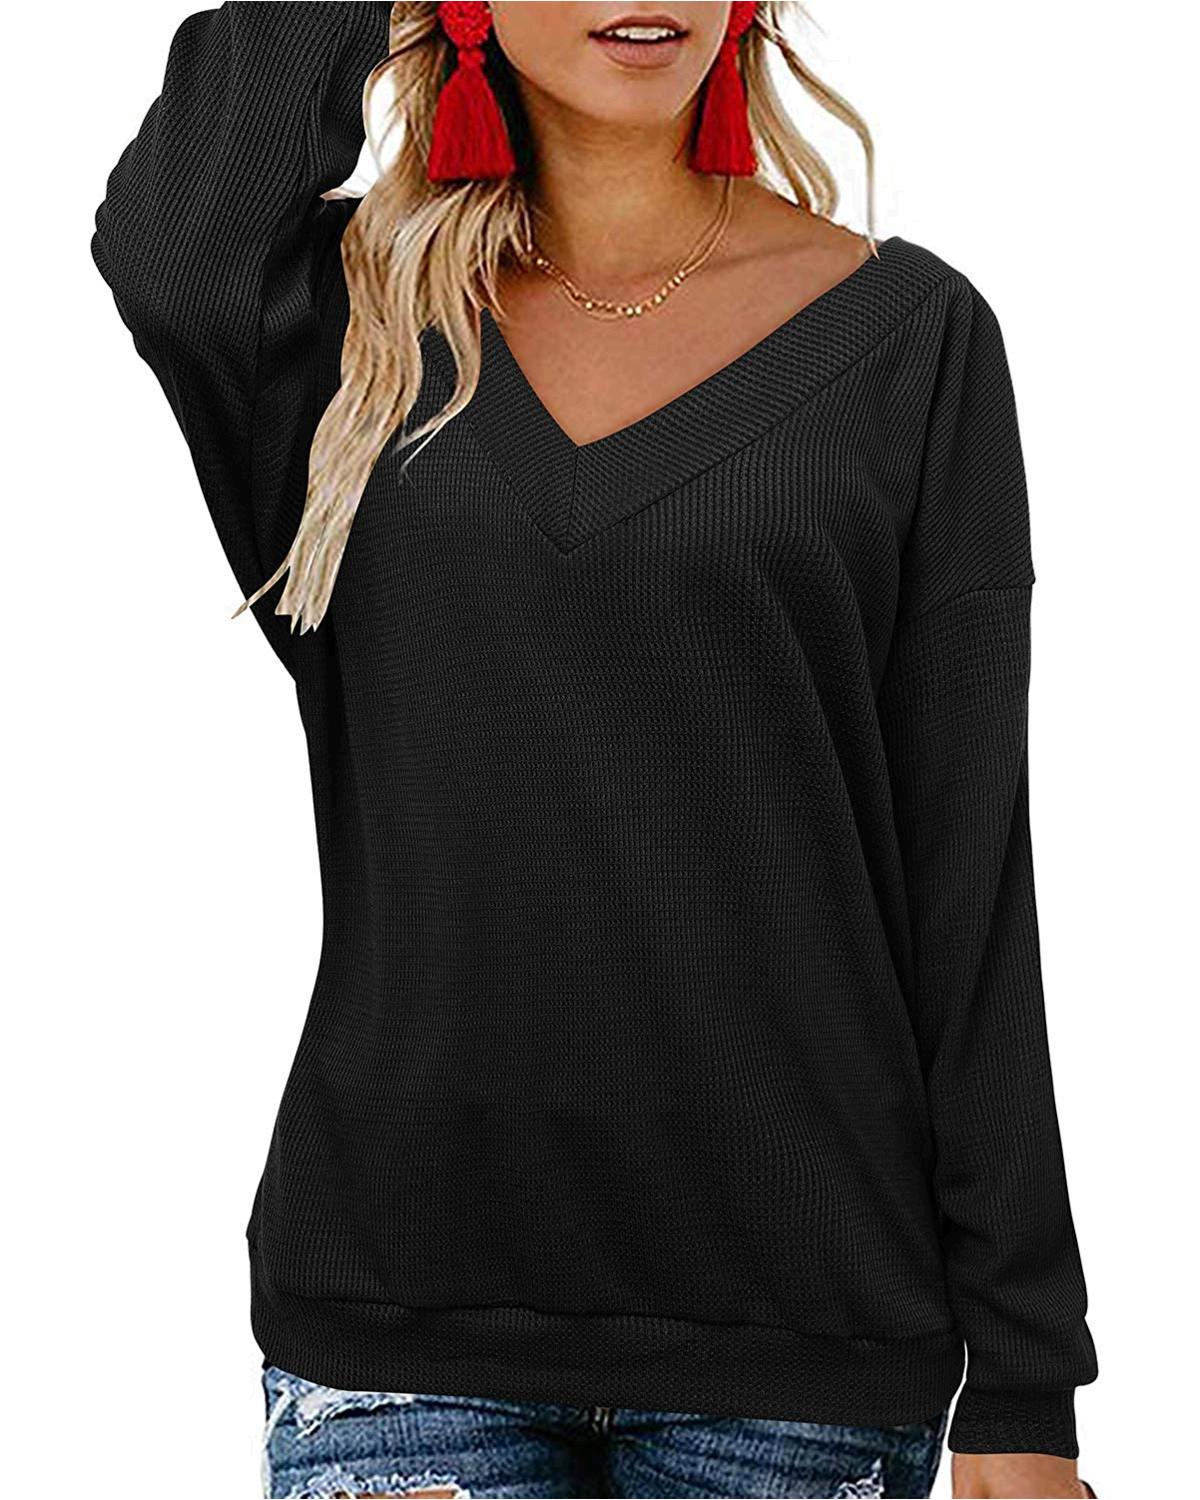 OUGES Womens Tie Back Knit Tops V Neck Long Sleeve Casual, Black, Size ...